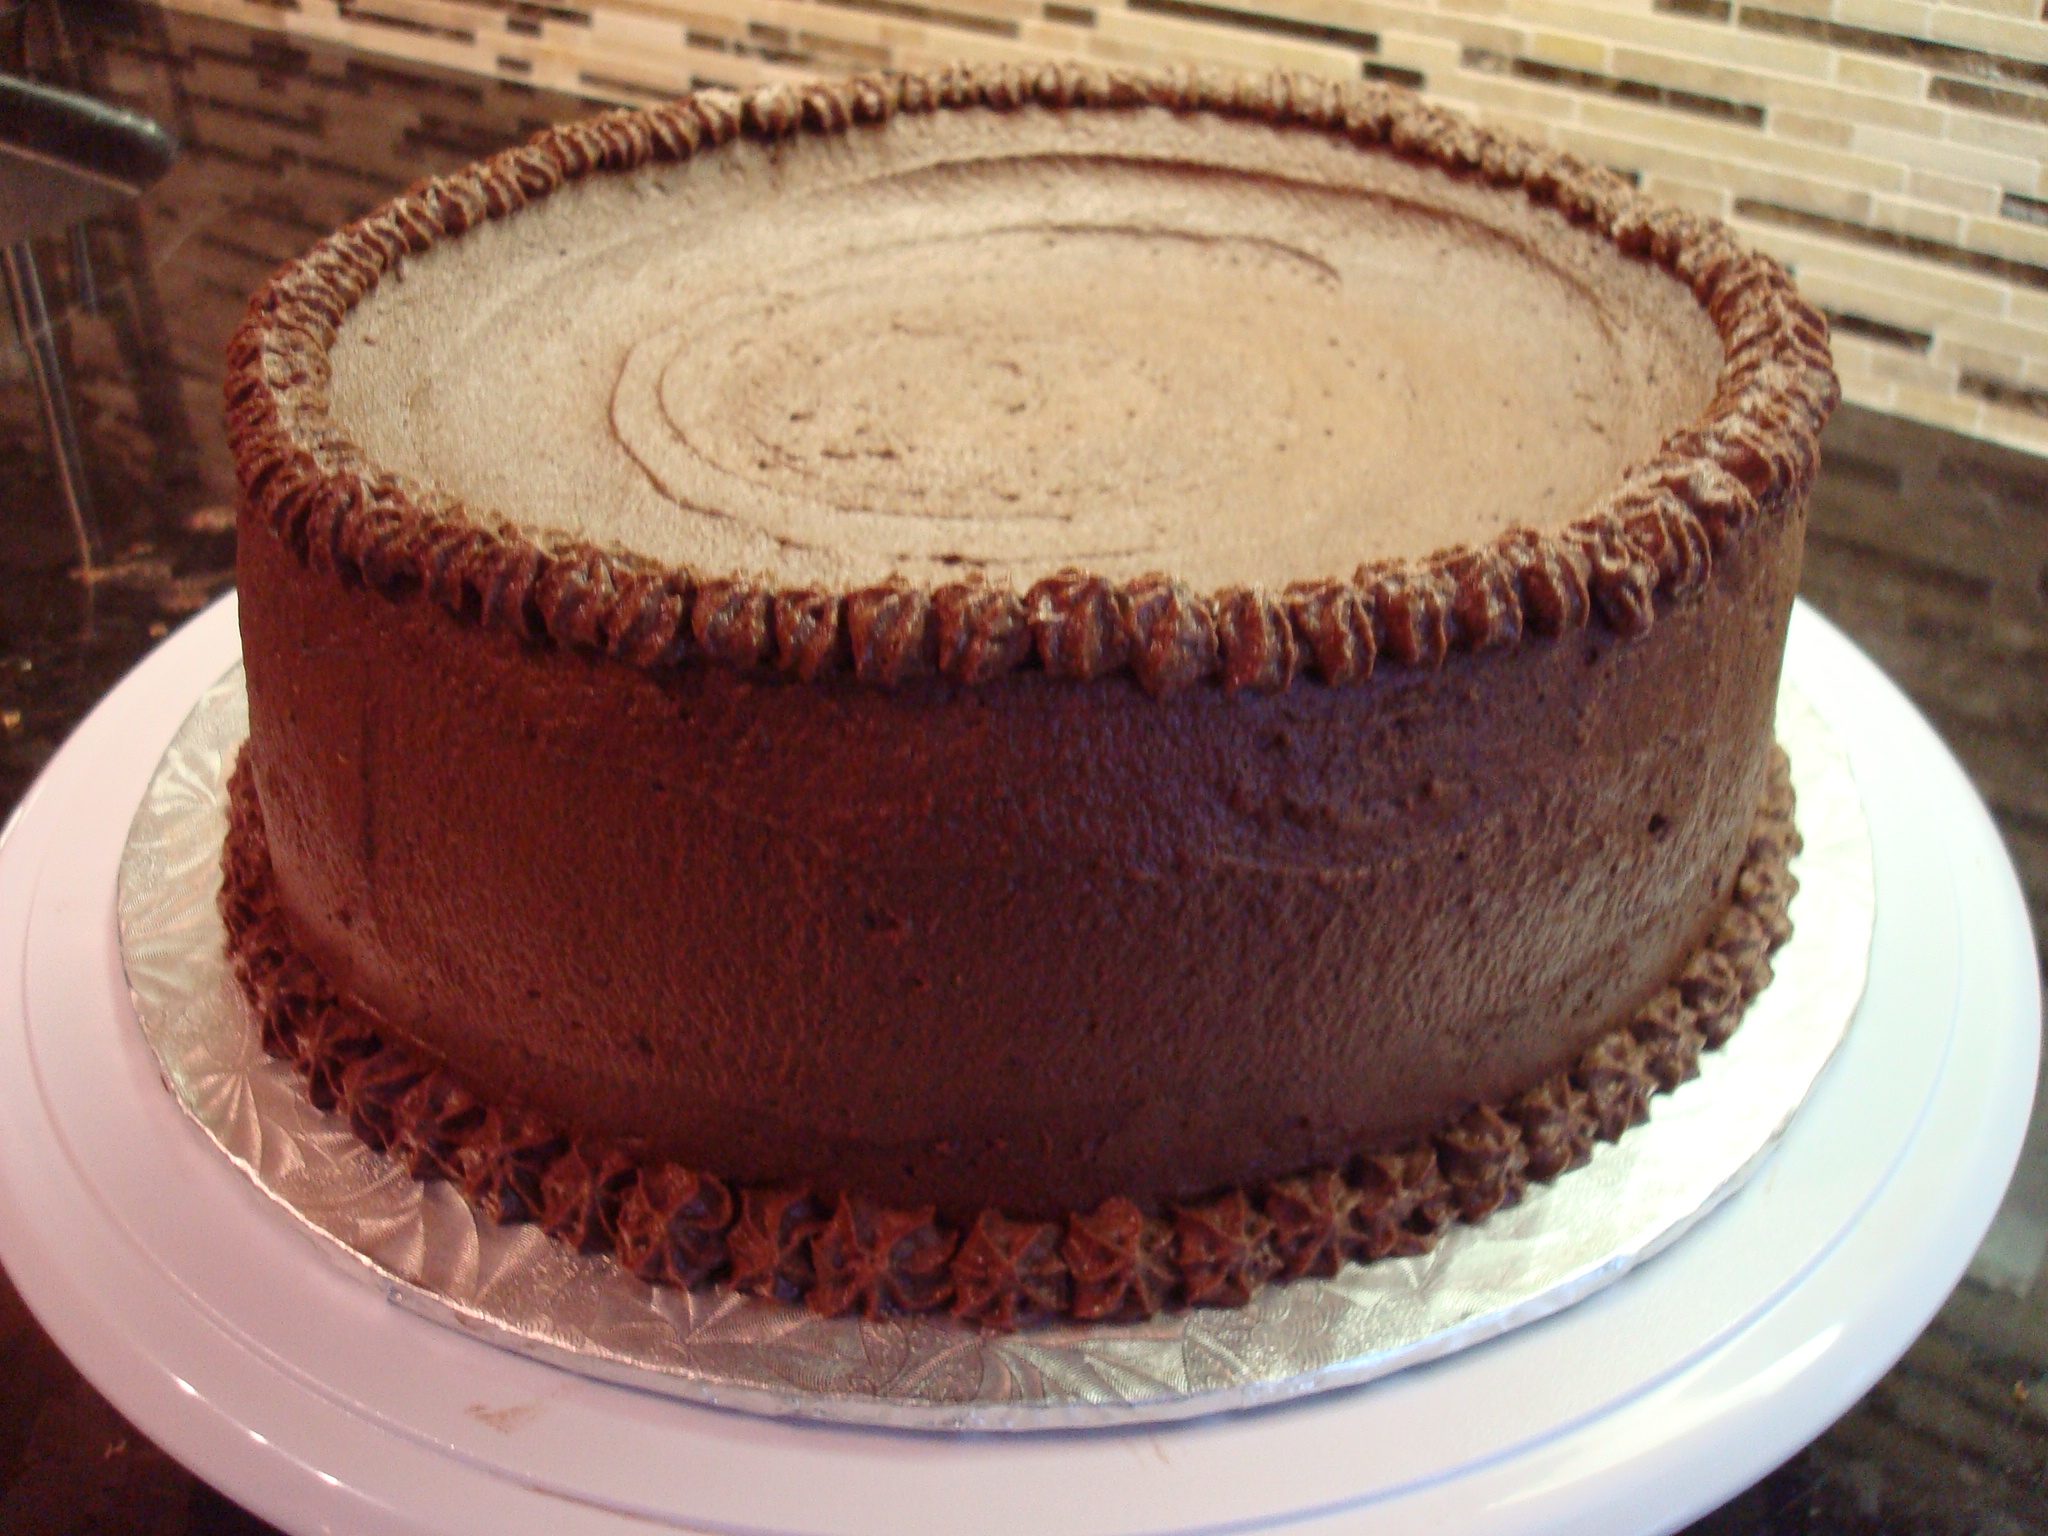 Walnut Torta with Chocolate Whipped Cream Frosting